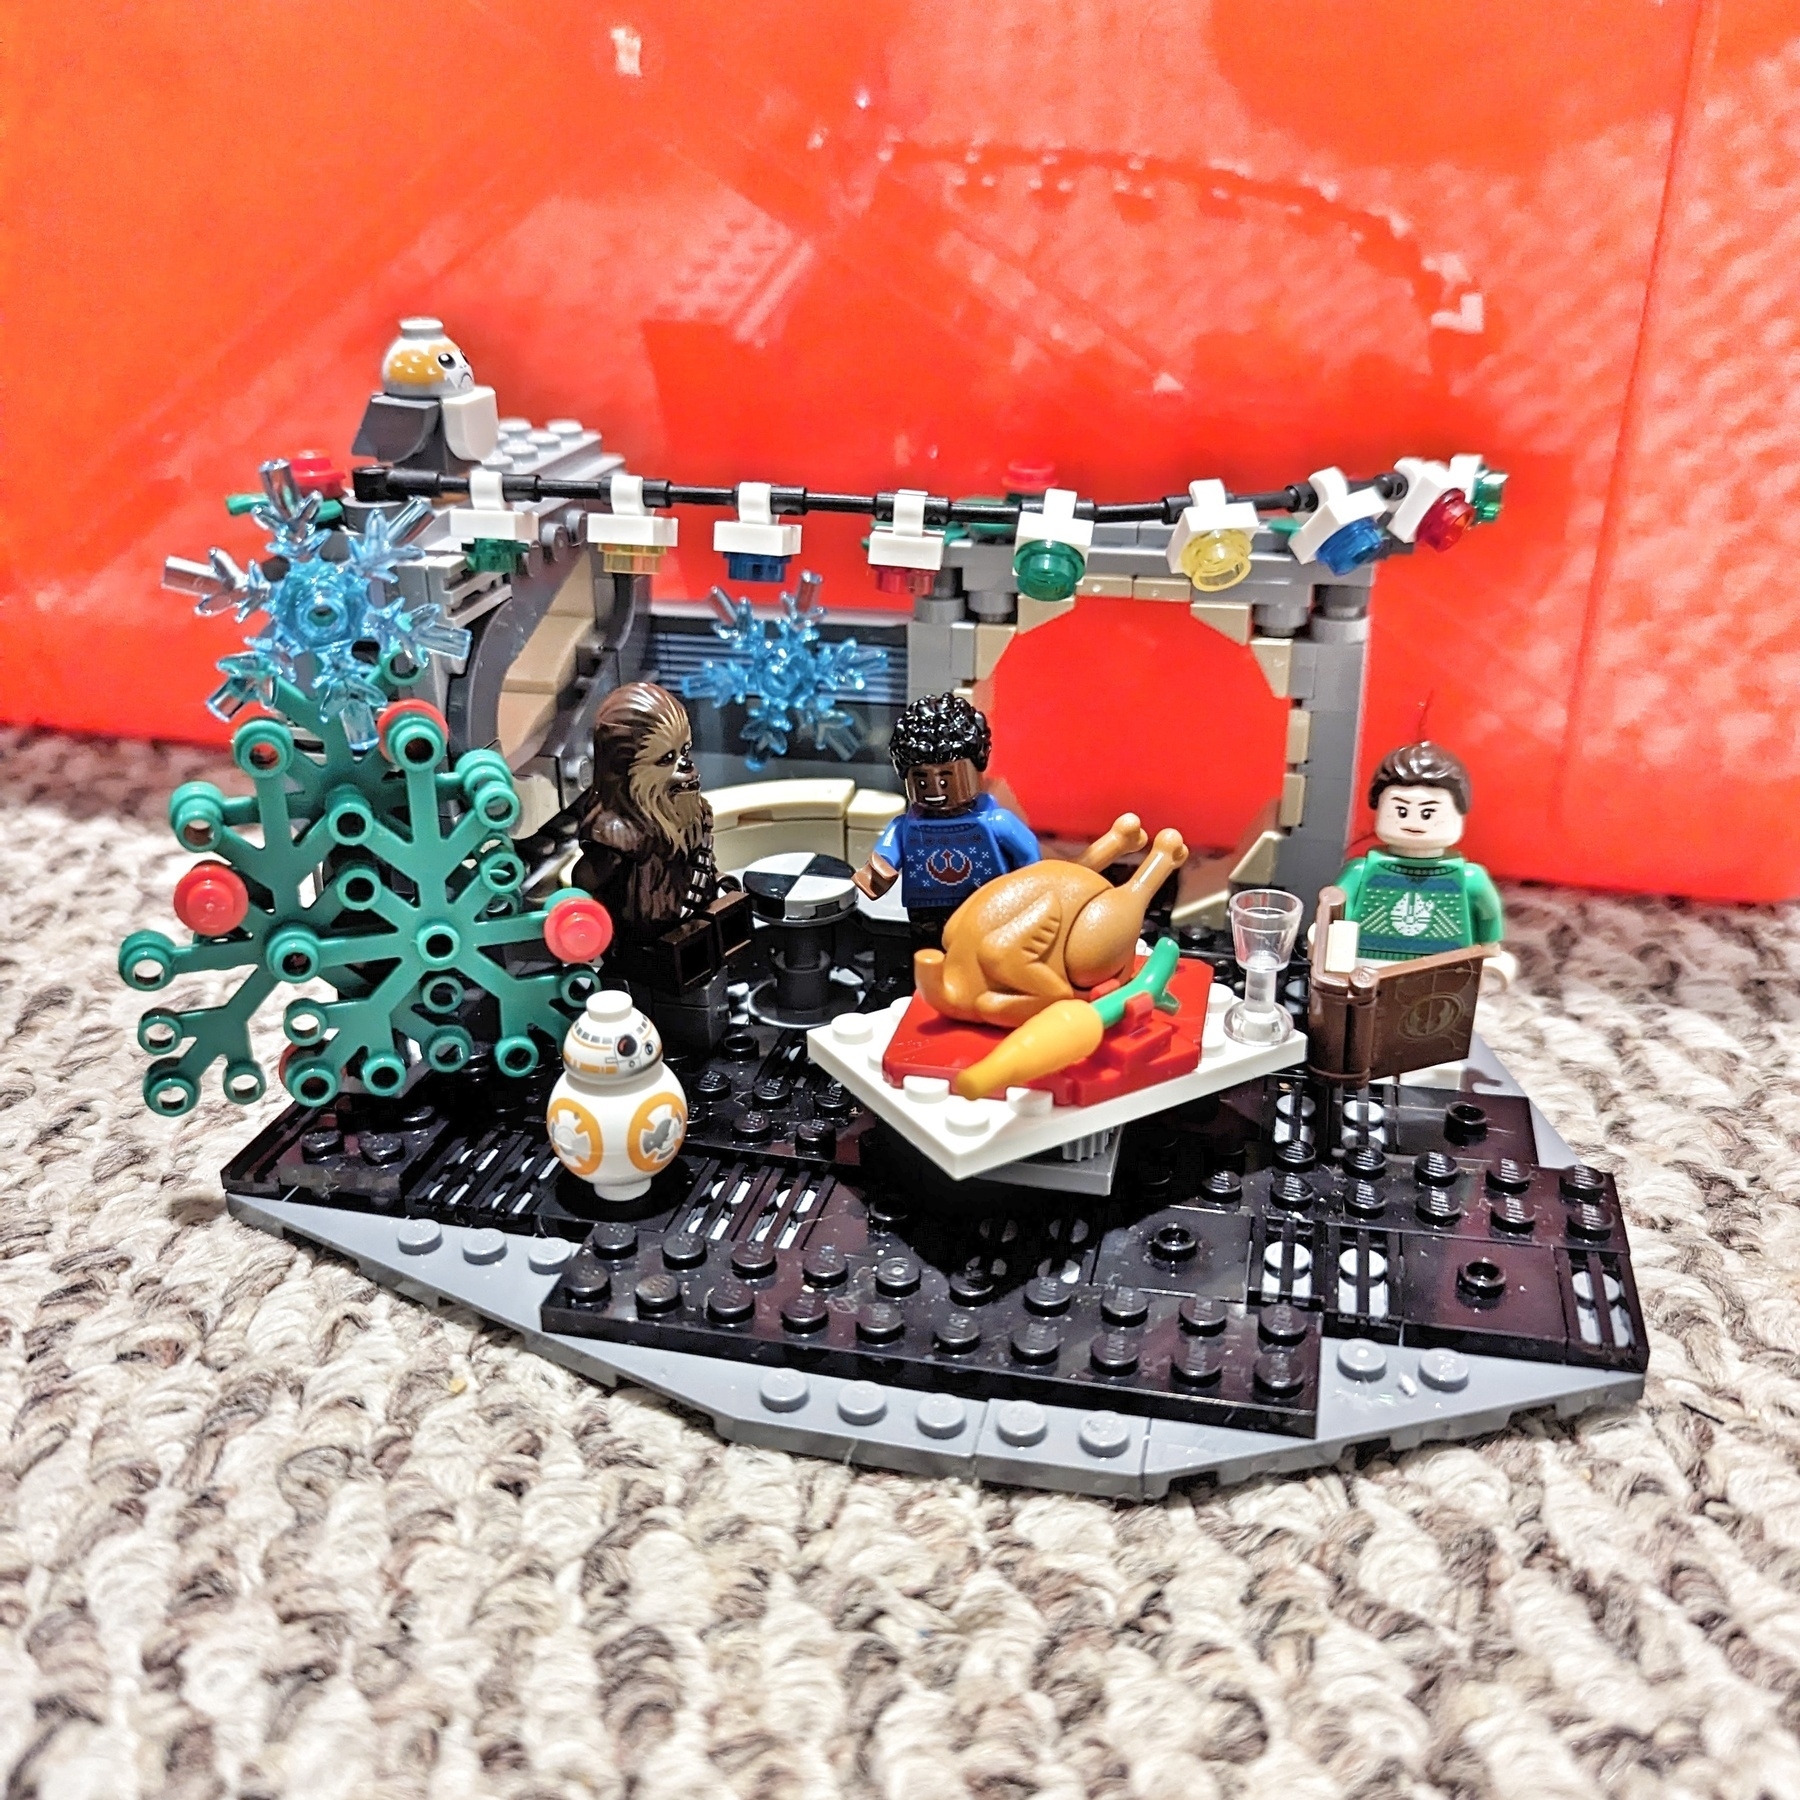 A LEGO set. In the Millennium Falcon, Chewbacca, Rey, Finn, BB-8, and a Porg celebrate Life Day with a tree, hanging lights, and some kind of cooked fowl with a carrot.